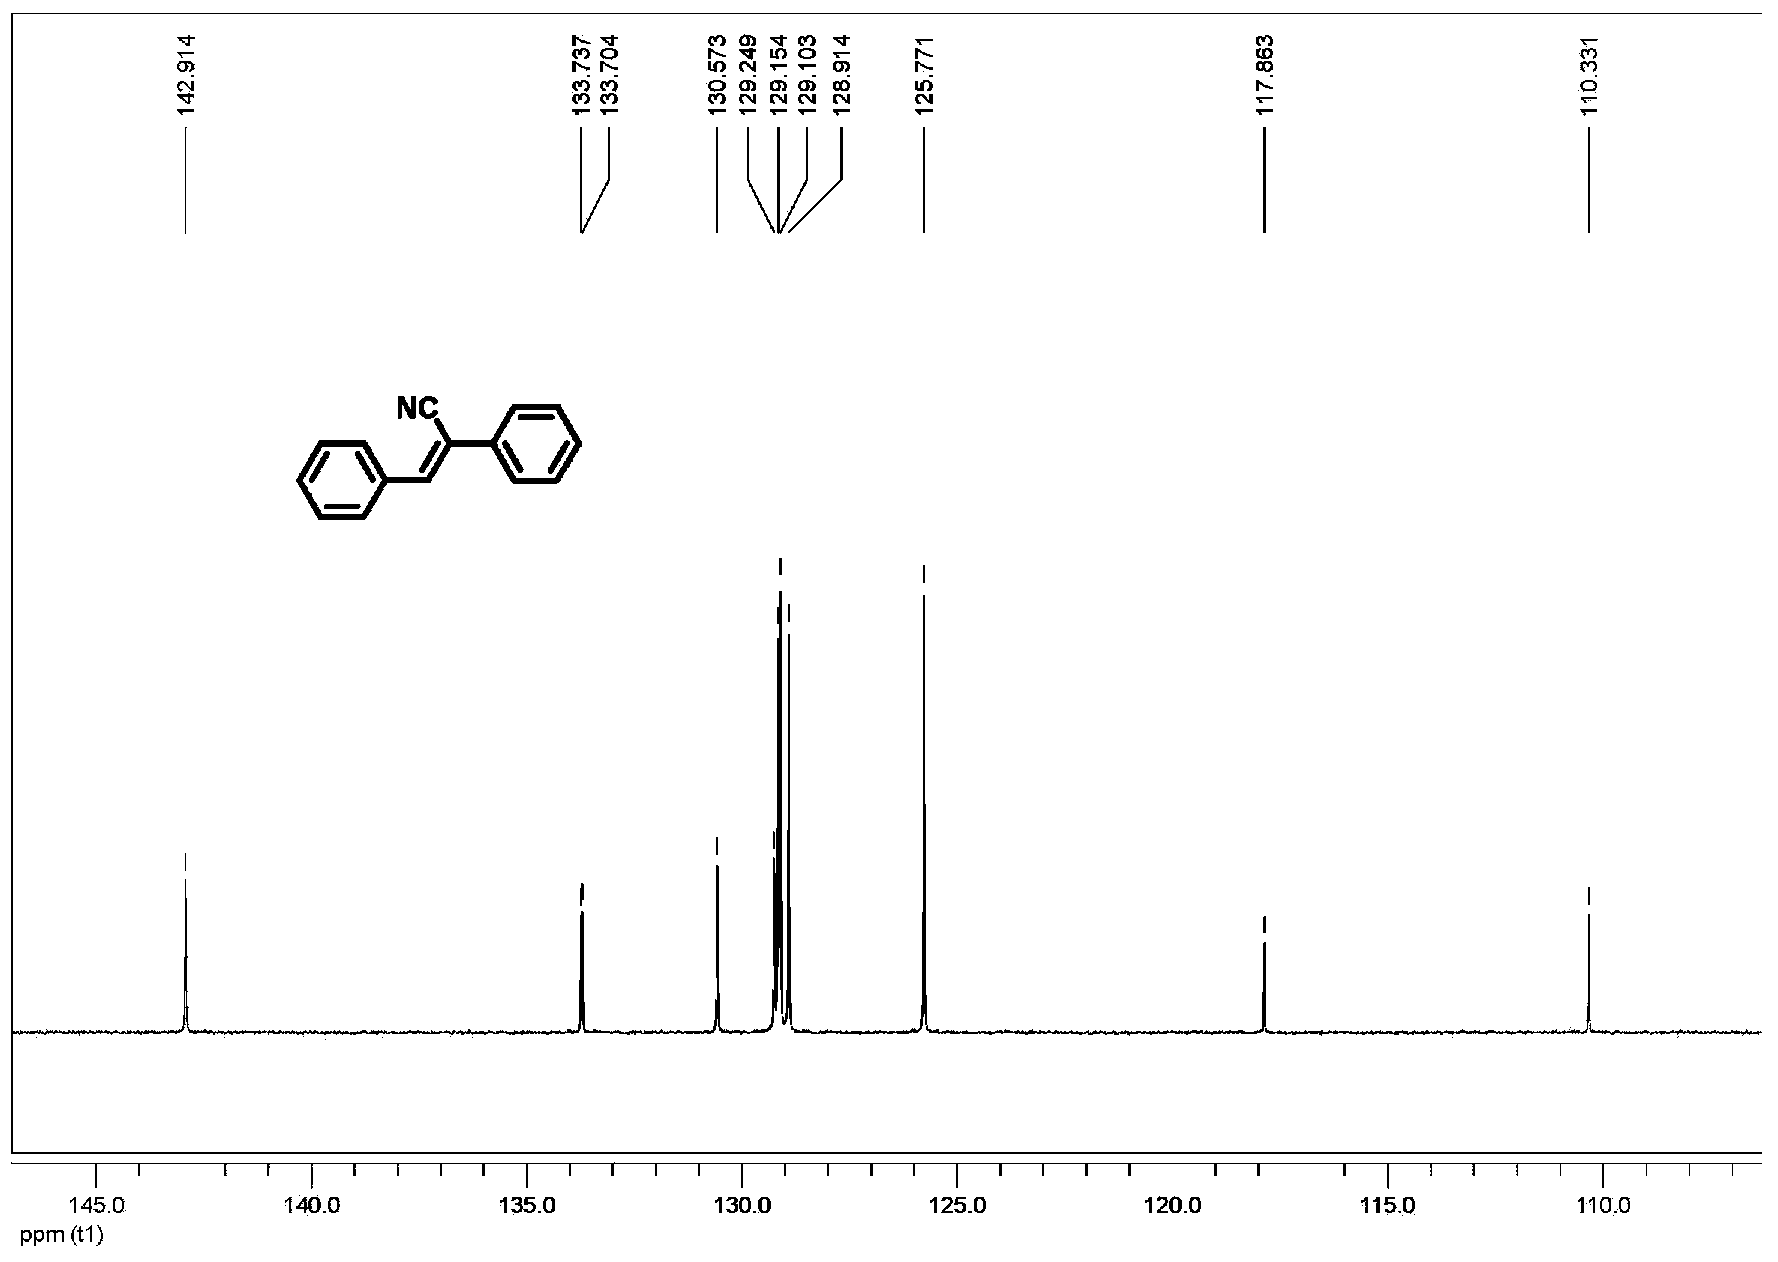 Method for aqueous-phase synthesizing cyan-substituted styrene compounds